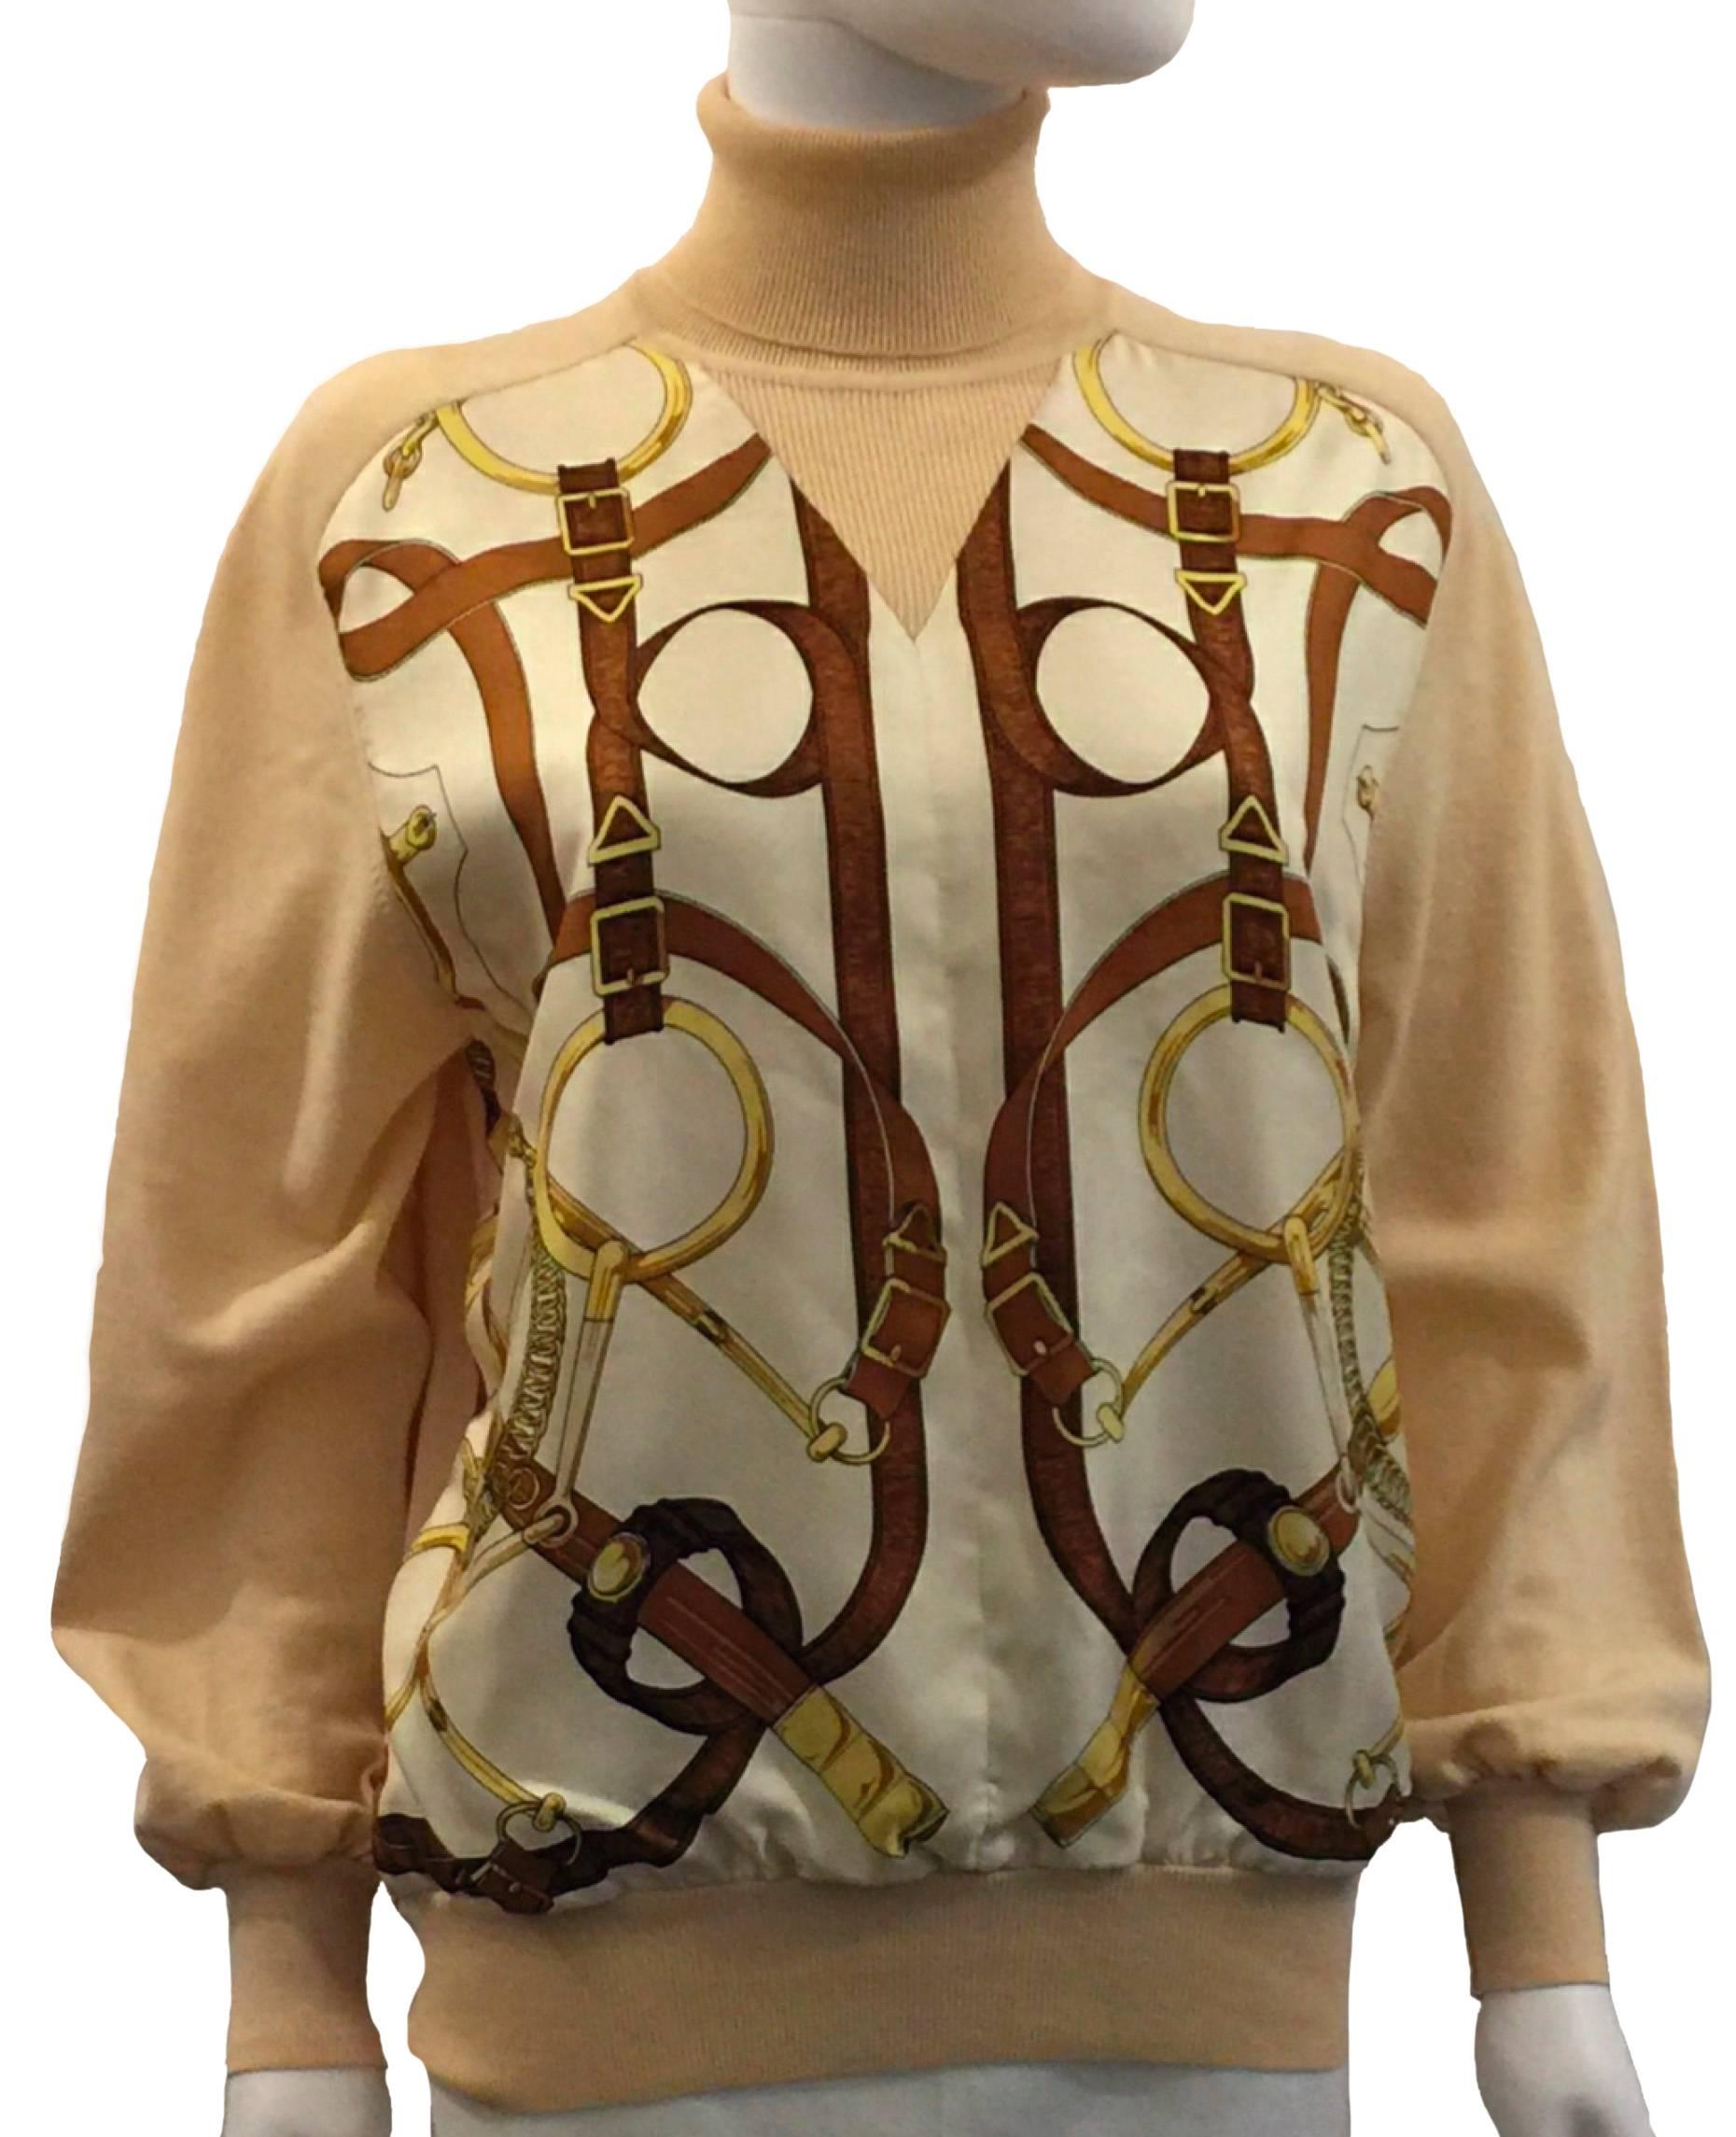 Hermes Twin Set with matching Scarf.  Vintage.  100% Silk with 100% Wool.  Colors- Cream Base with Brown & Gold.  Size EU42.  Sleeve 63 cm; Shoulders 42cm & Length 66cm.  The Set comprises a Polo Necked Equestrian Silk Fronted Sweater; a Matching